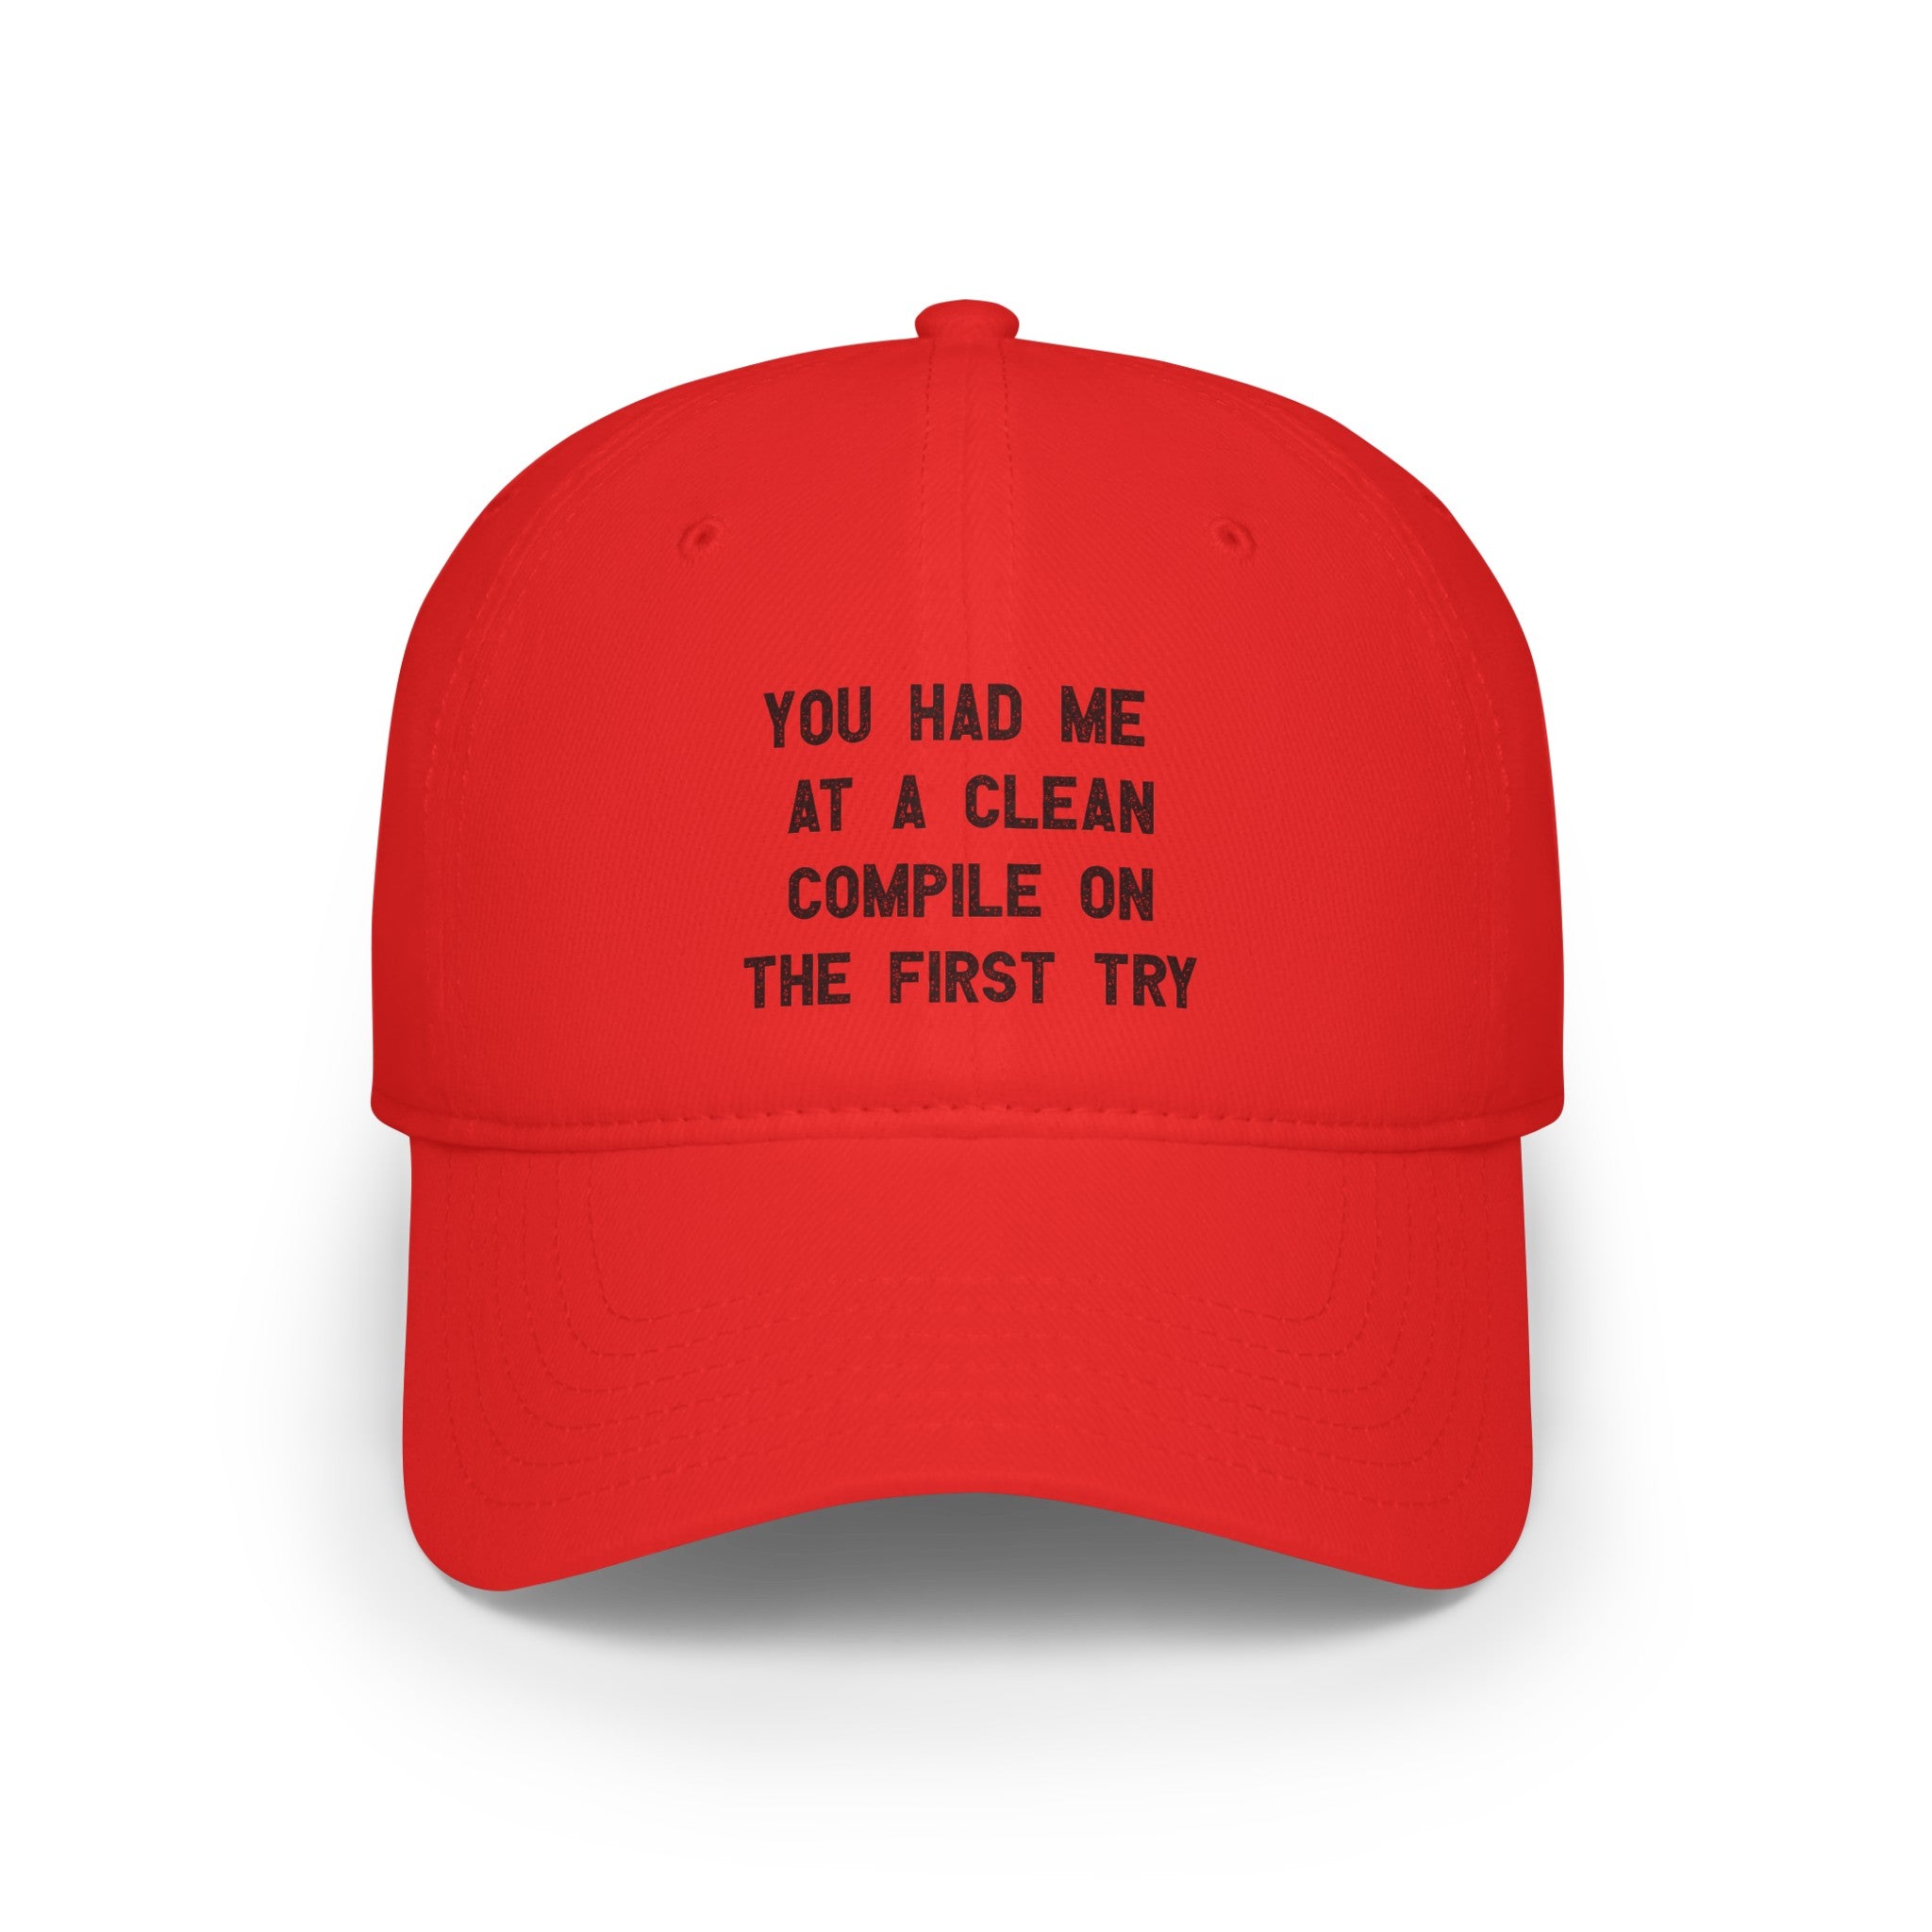 You Had Me At a Clean Compile on the First Try - Hat. This coder lingo hat features durable stitching, perfect for showcasing your coding pride.